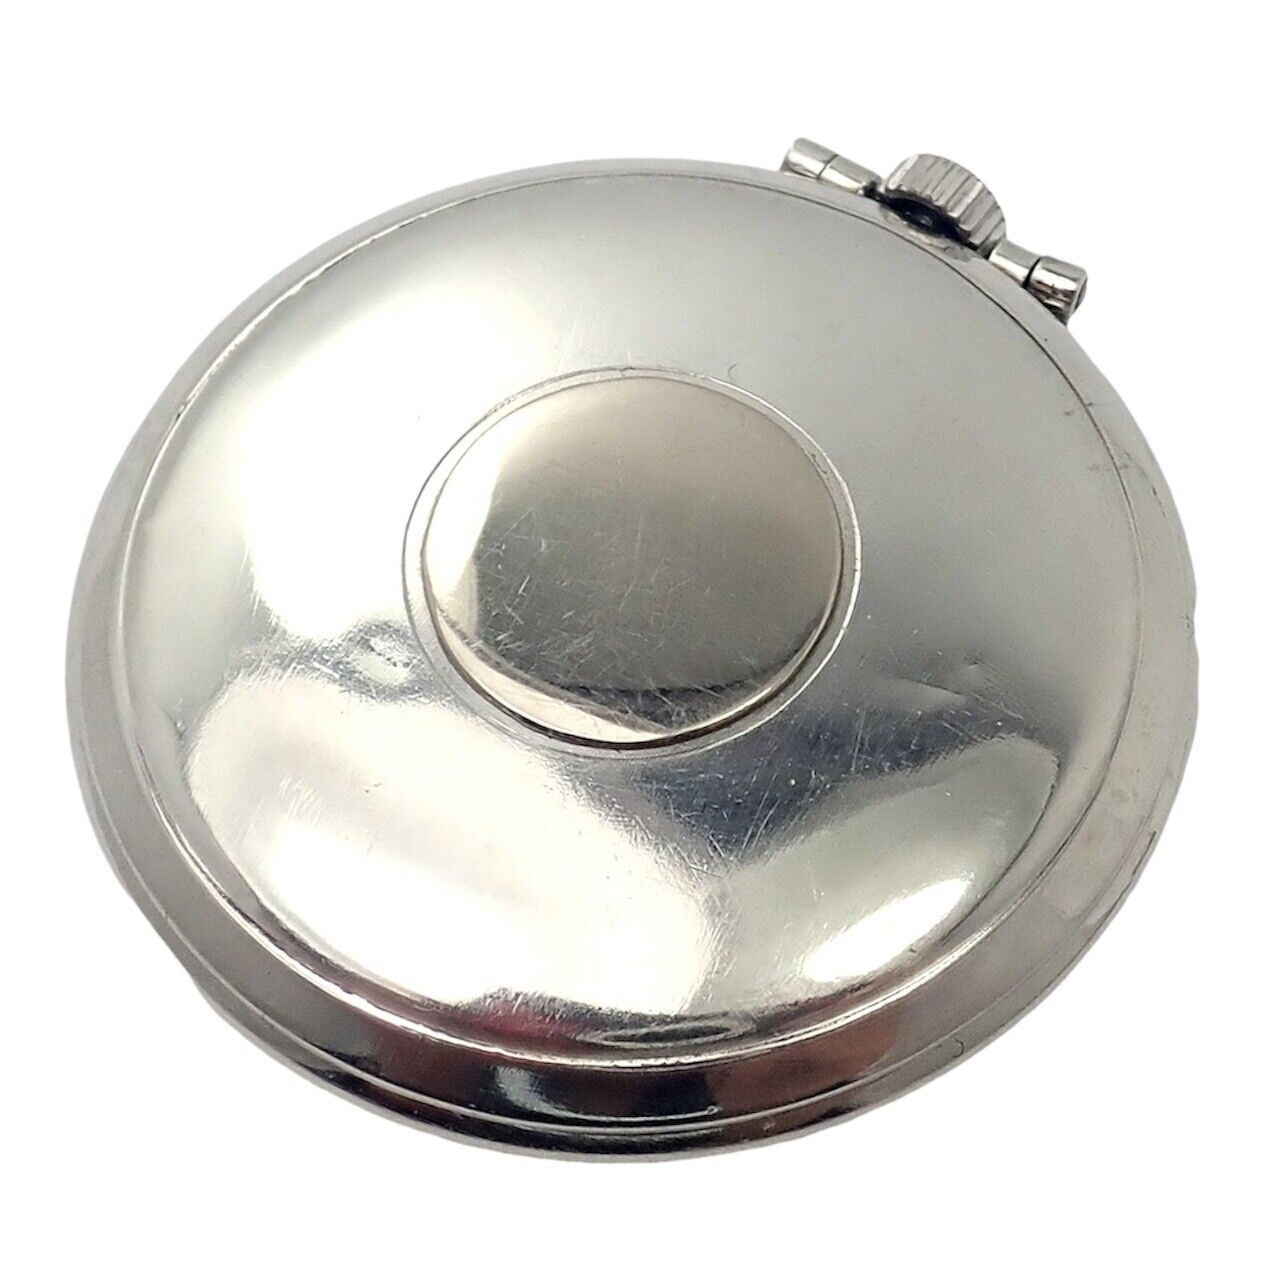 Patek Philippe Jewelry & Watches:Watches, Parts & Accessories:Watches:Pocket Watches Ultra Rare! Patek Philippe Platinum Diamond 14s Pocket Watch c. 1885